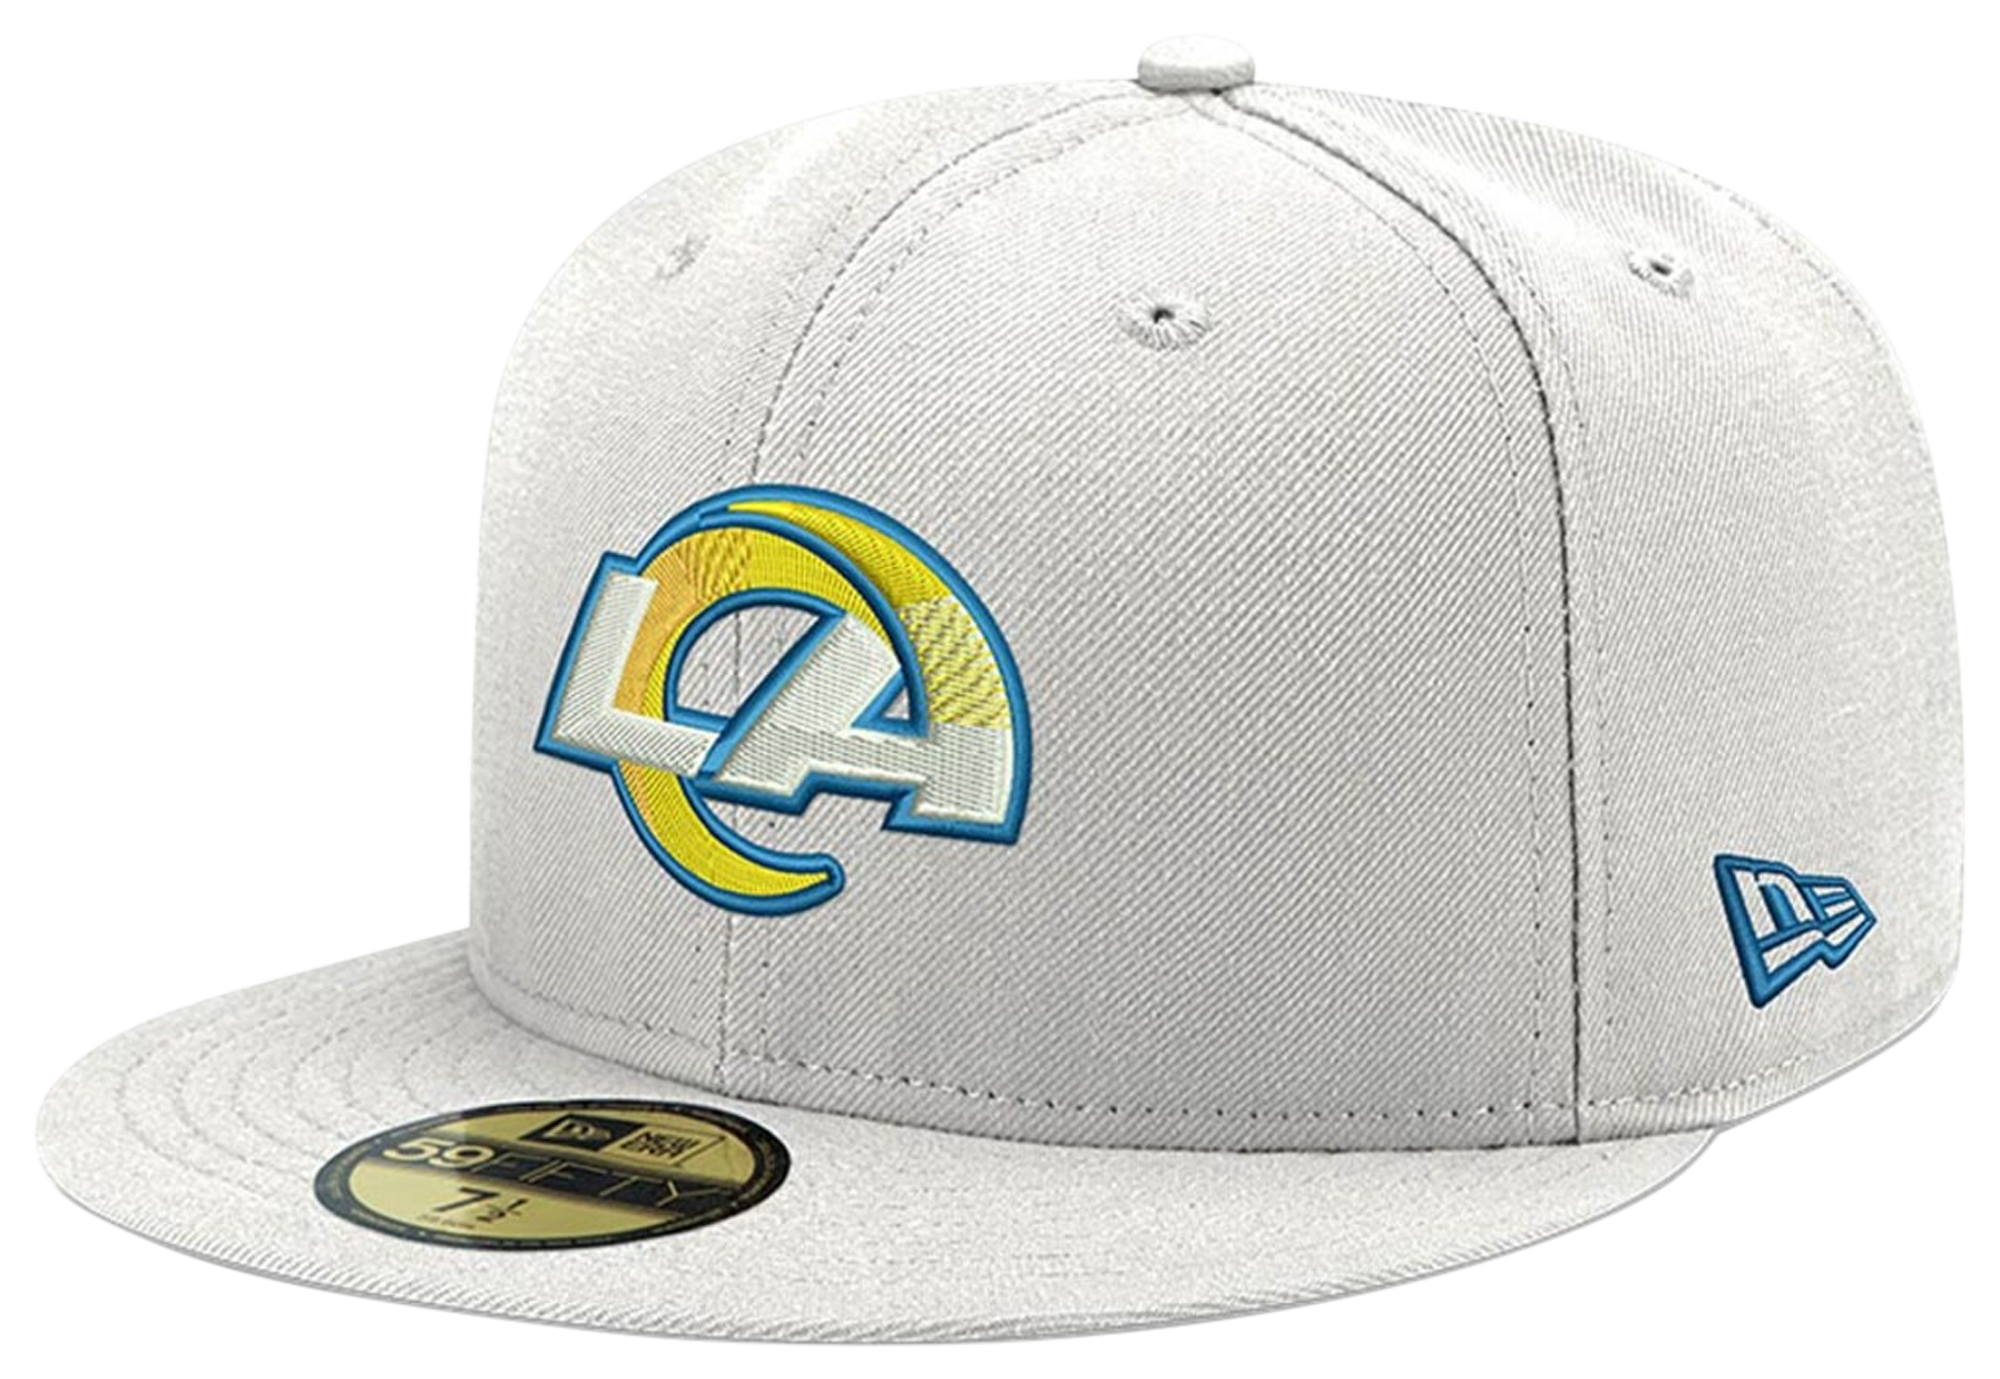 New Era Rams 59Fifty Fitted Hat